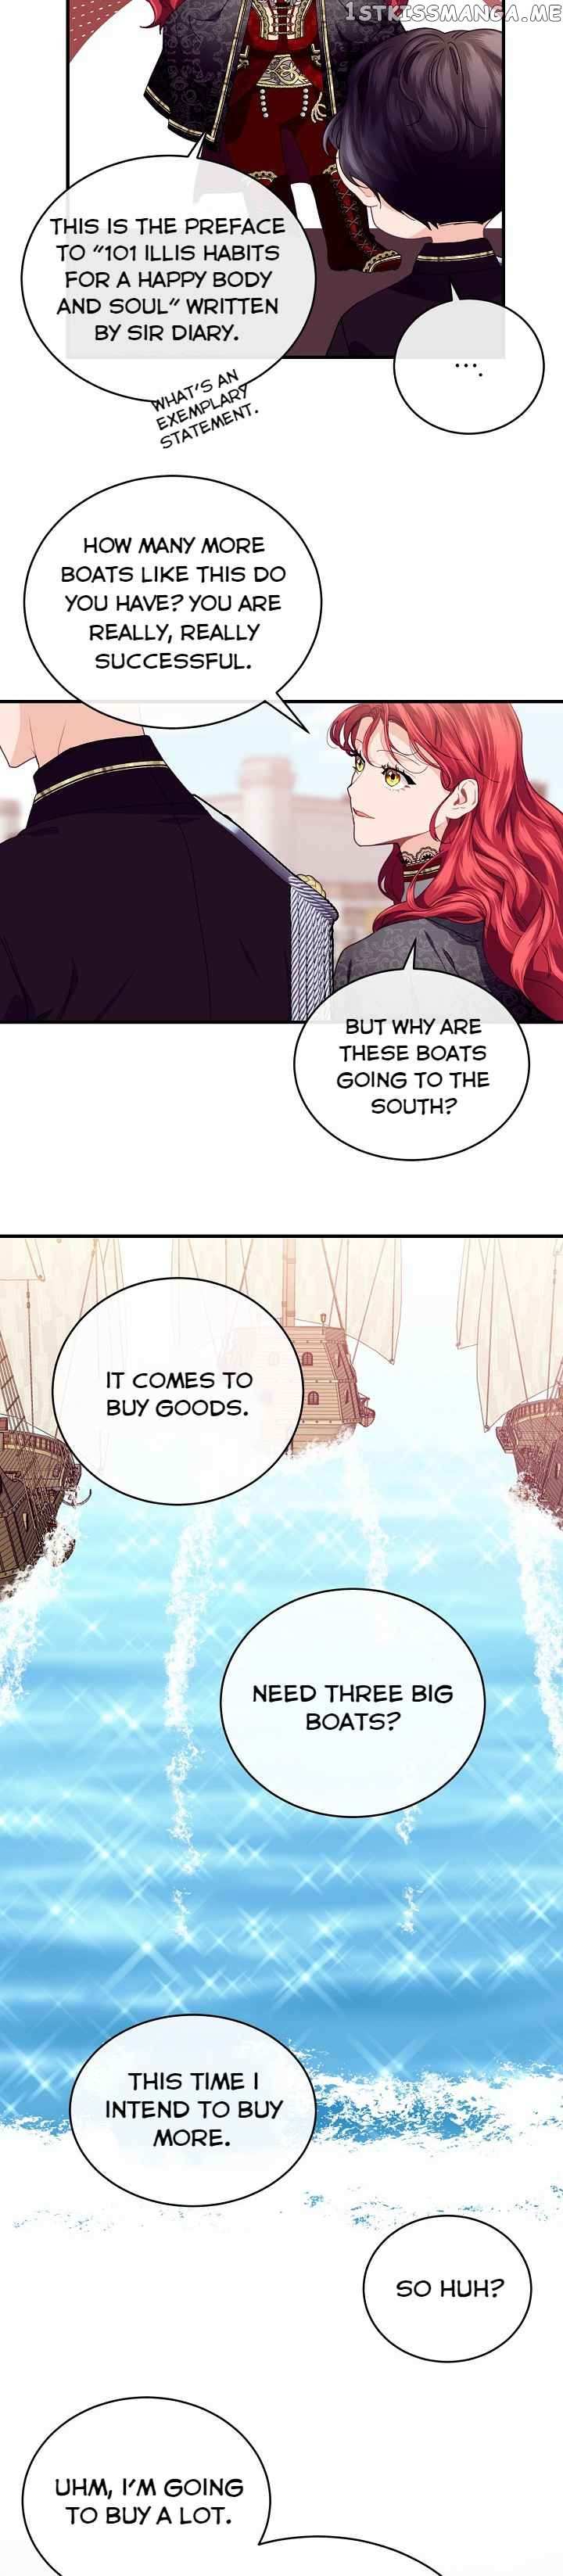 The Elegant Sea of Savagery  - page 16